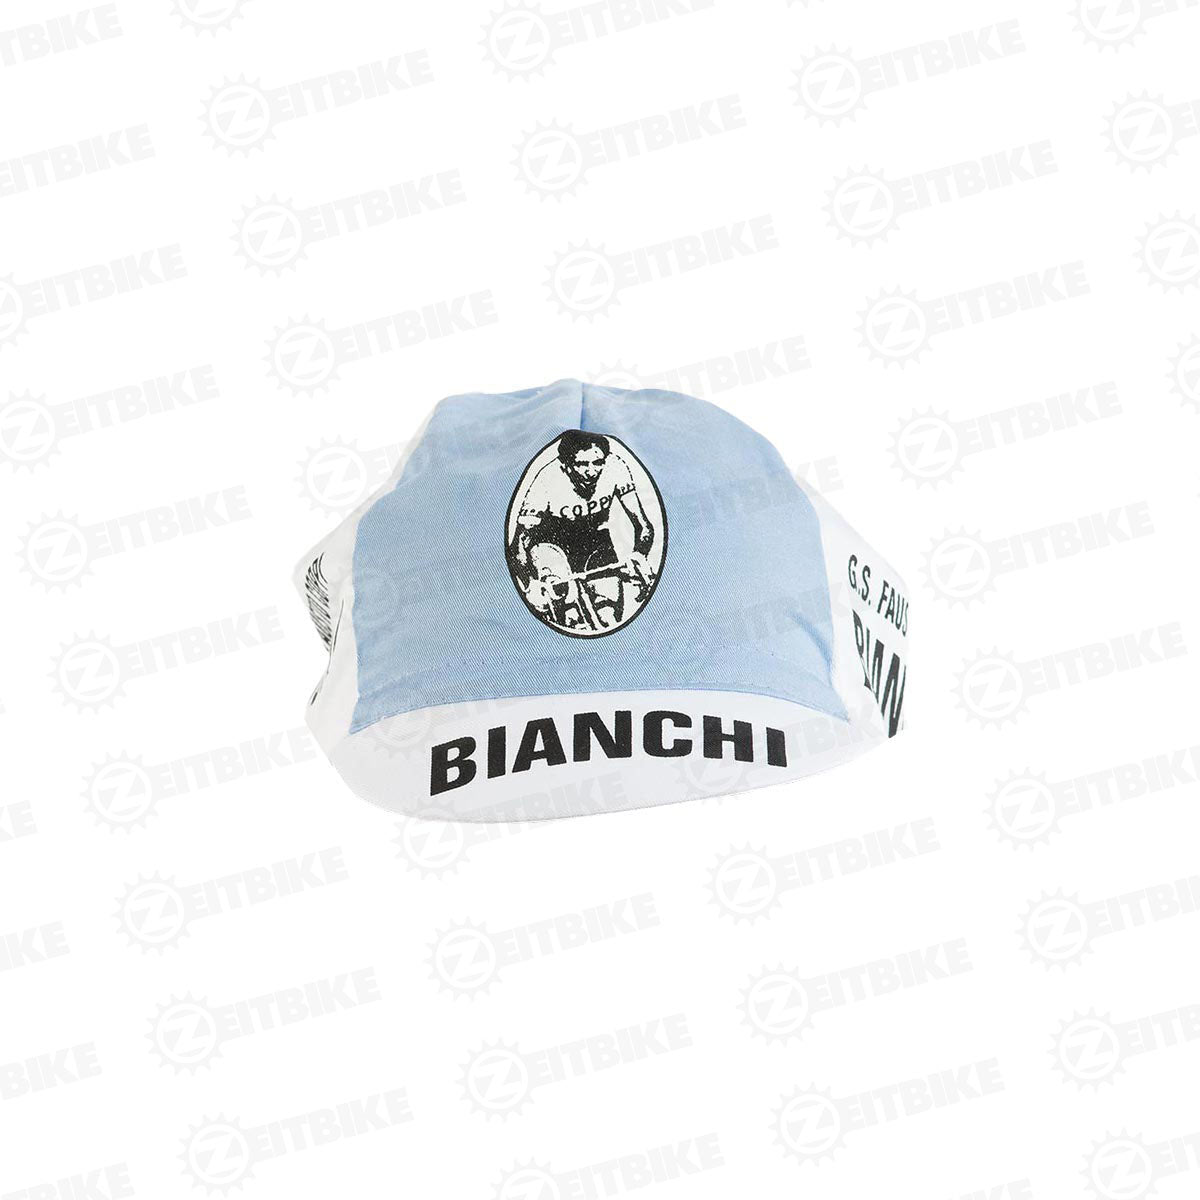 ZEITBIKE - Vintage Cycling Cap - F. Coppi - Bianchi  | Anti Sweat Caps | for Stand Alone or Under Helmet | Team Jersey Cap Outdoor Cap